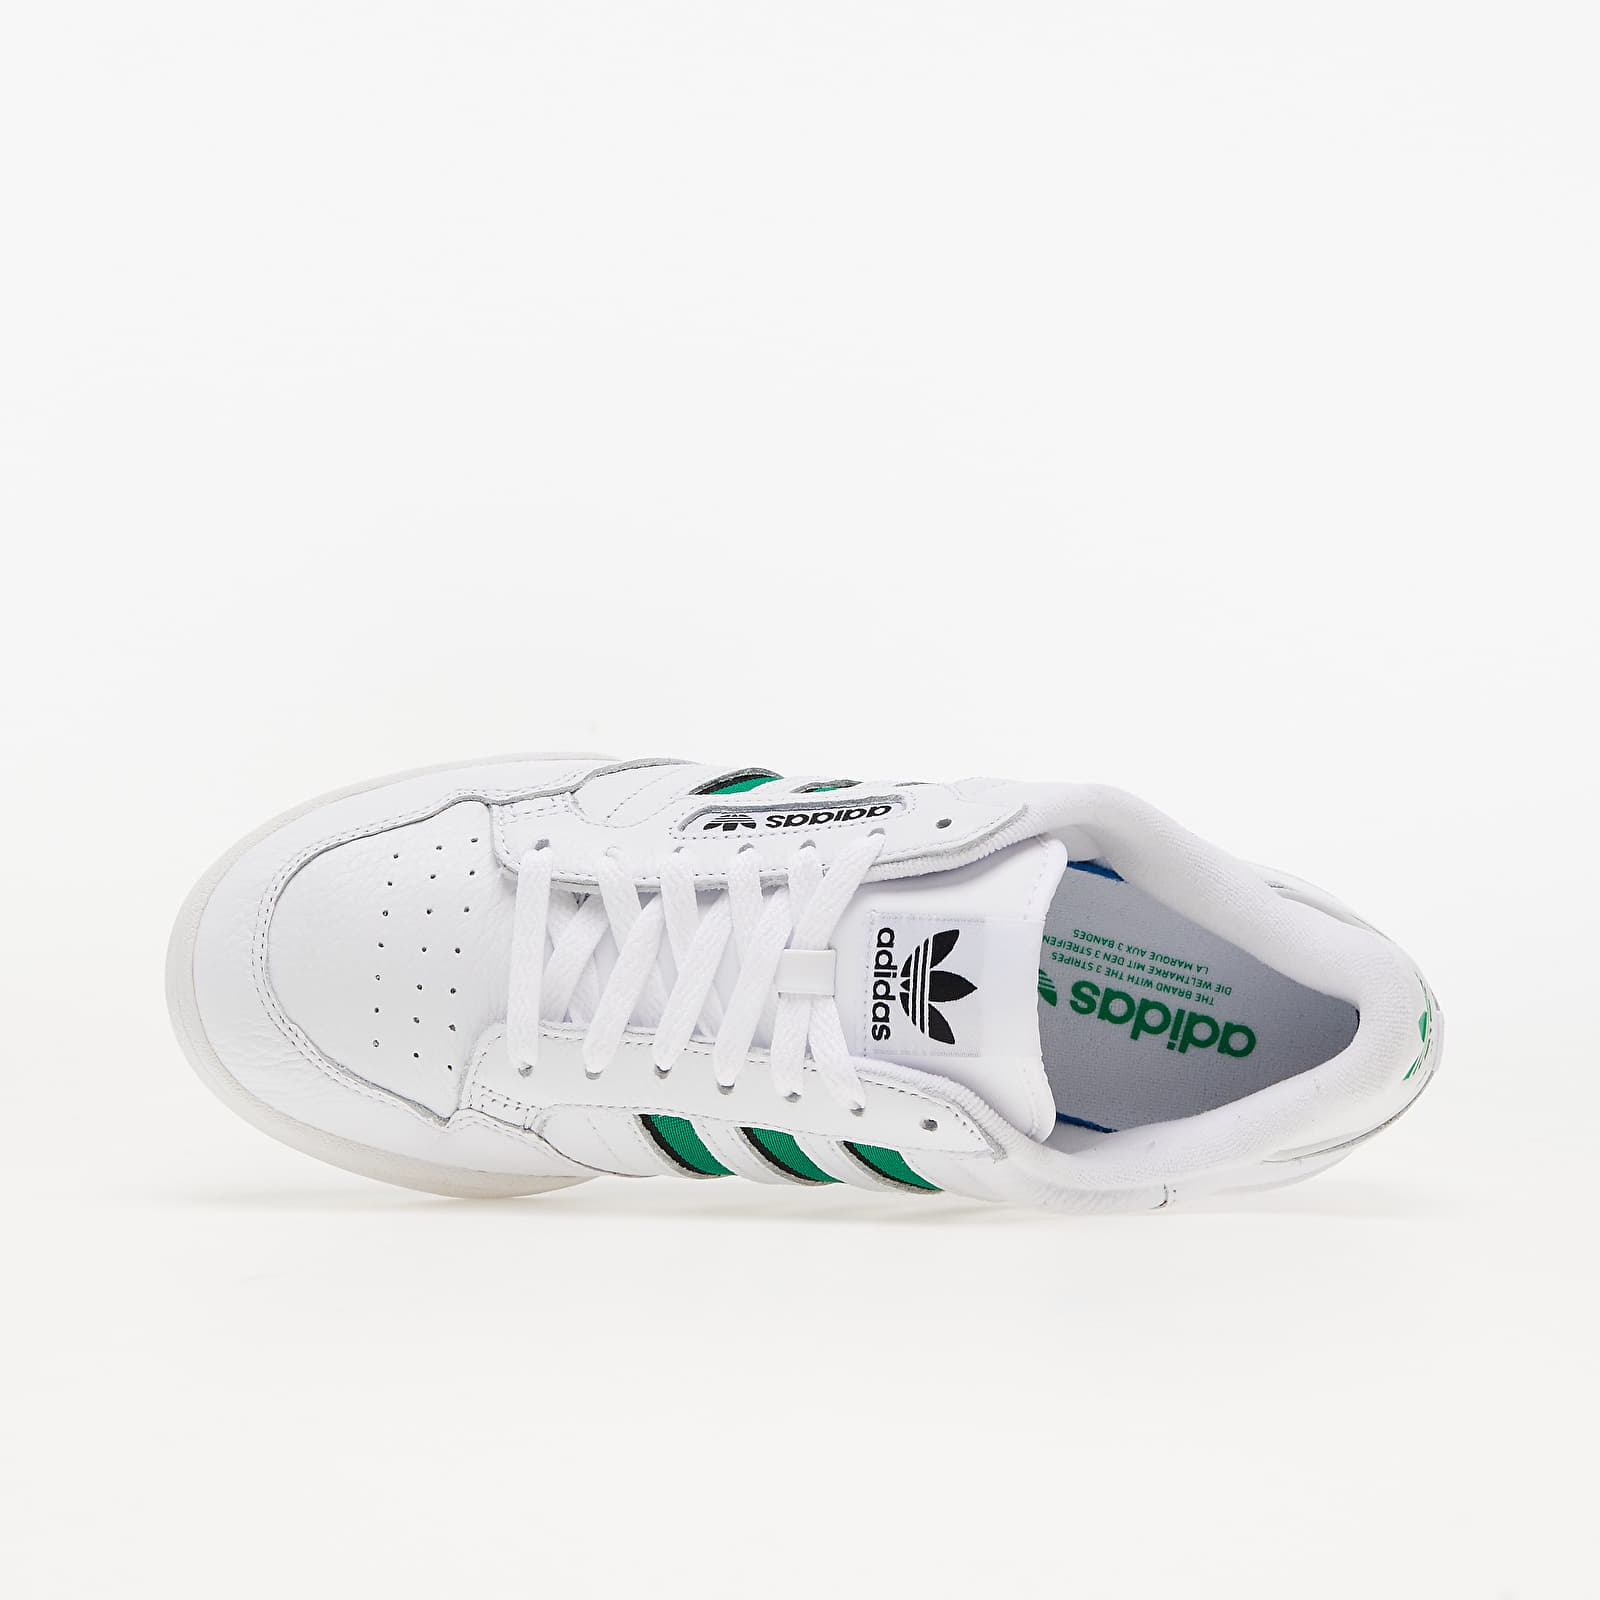 adidas Originals Forum Bold stripe sneakers in white and sage green | ASOS